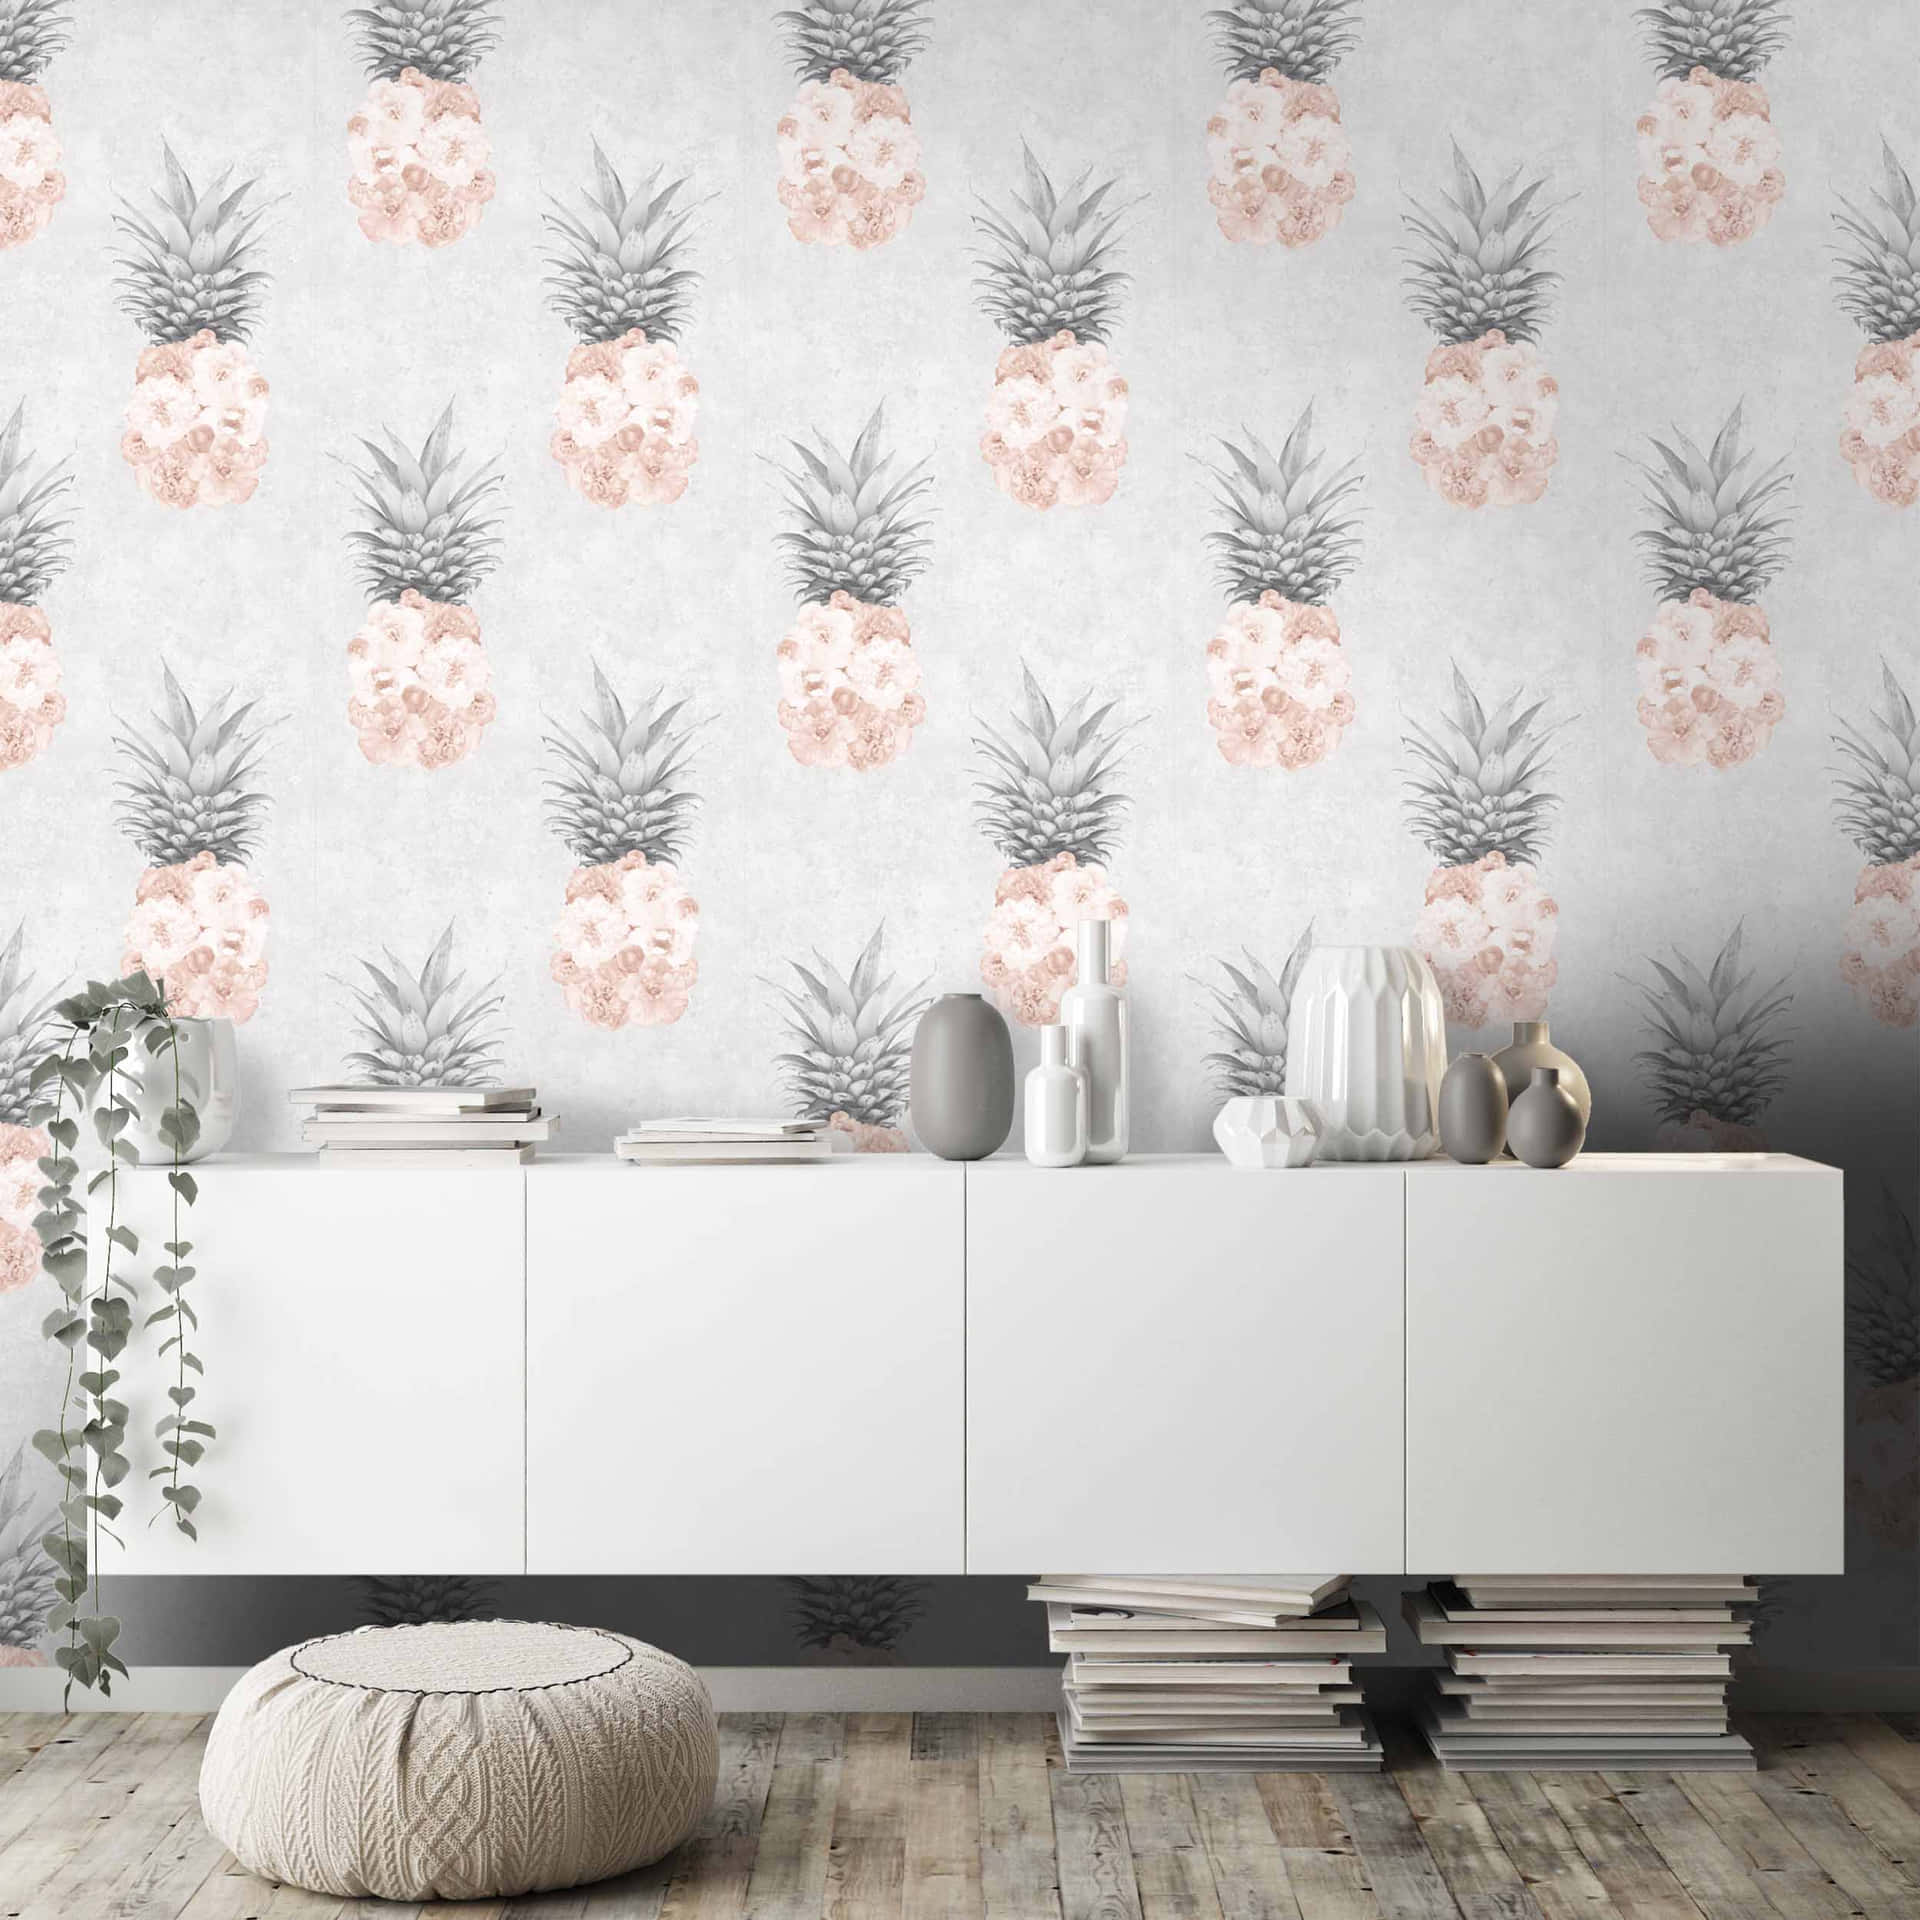 A tranquil blend of grey and pink Wallpaper